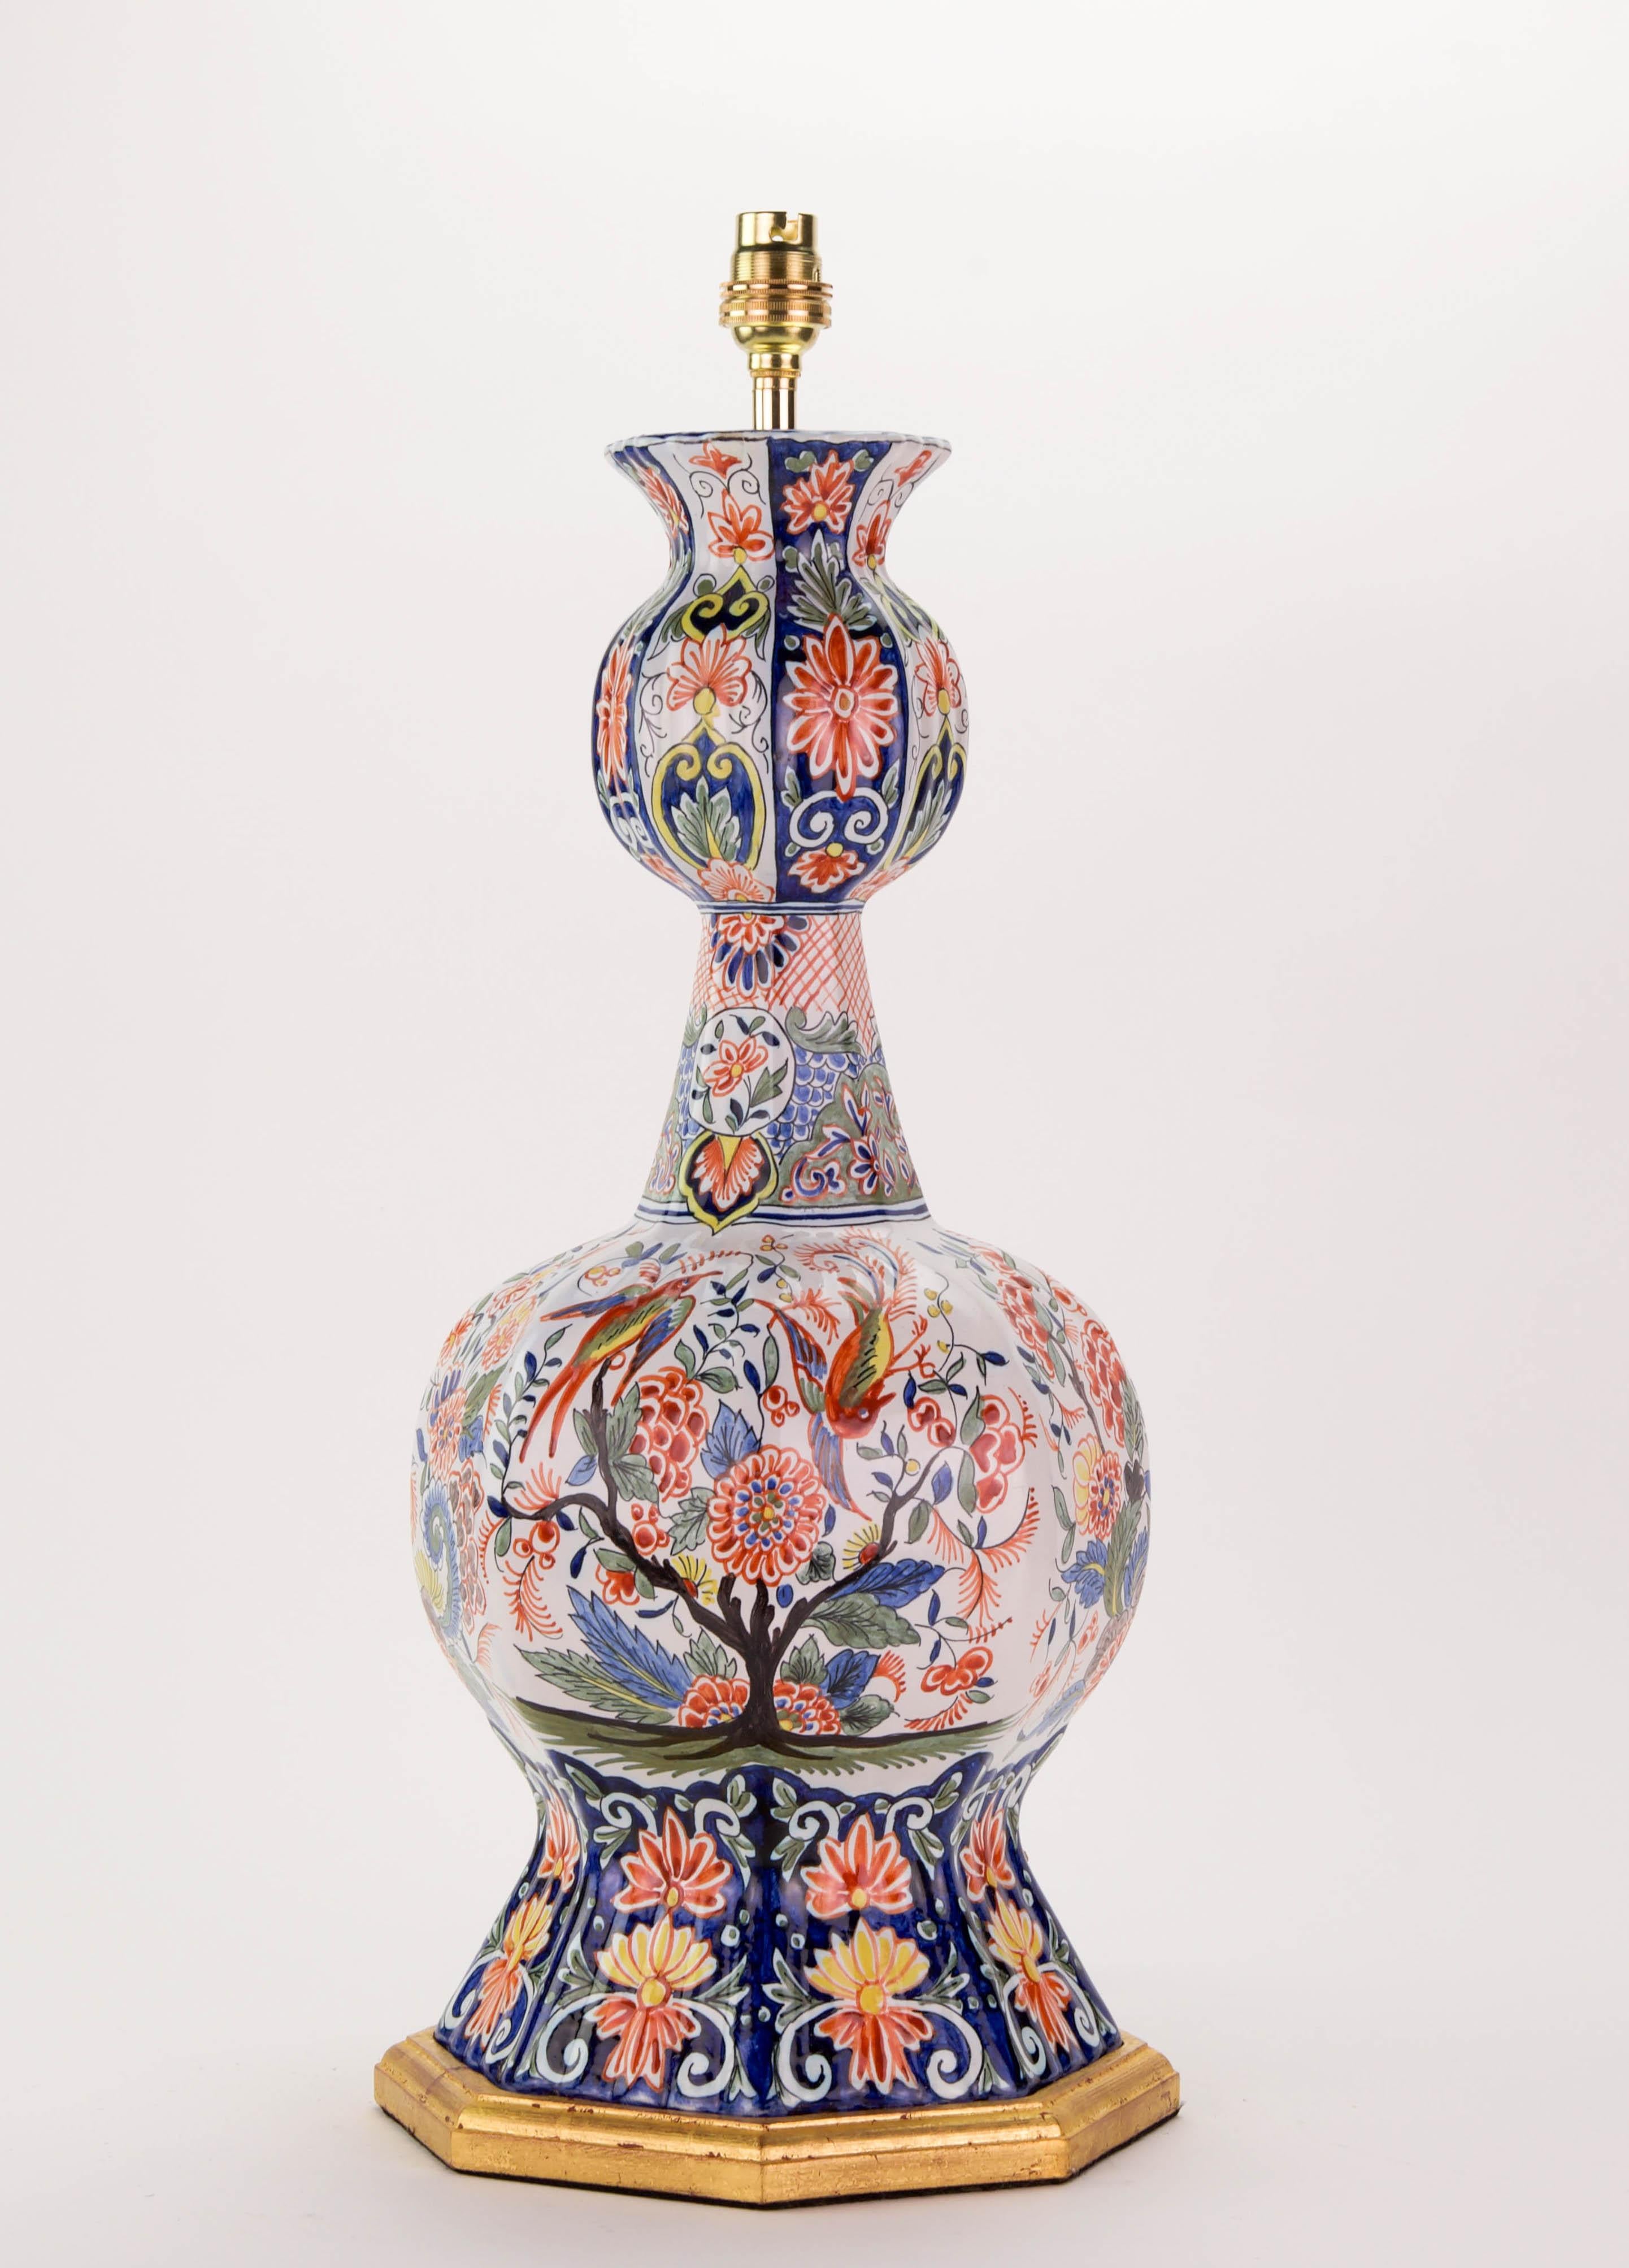 A fine Dutch Delft lamp, of hexagonal form, decorated in wonderful polychrome colours, with exotic birds in garden scenery.

Height of vase: 18 3/4 in (47.5  cm) including giltwood base, but excluding electrical fitments and lampshades.

All of